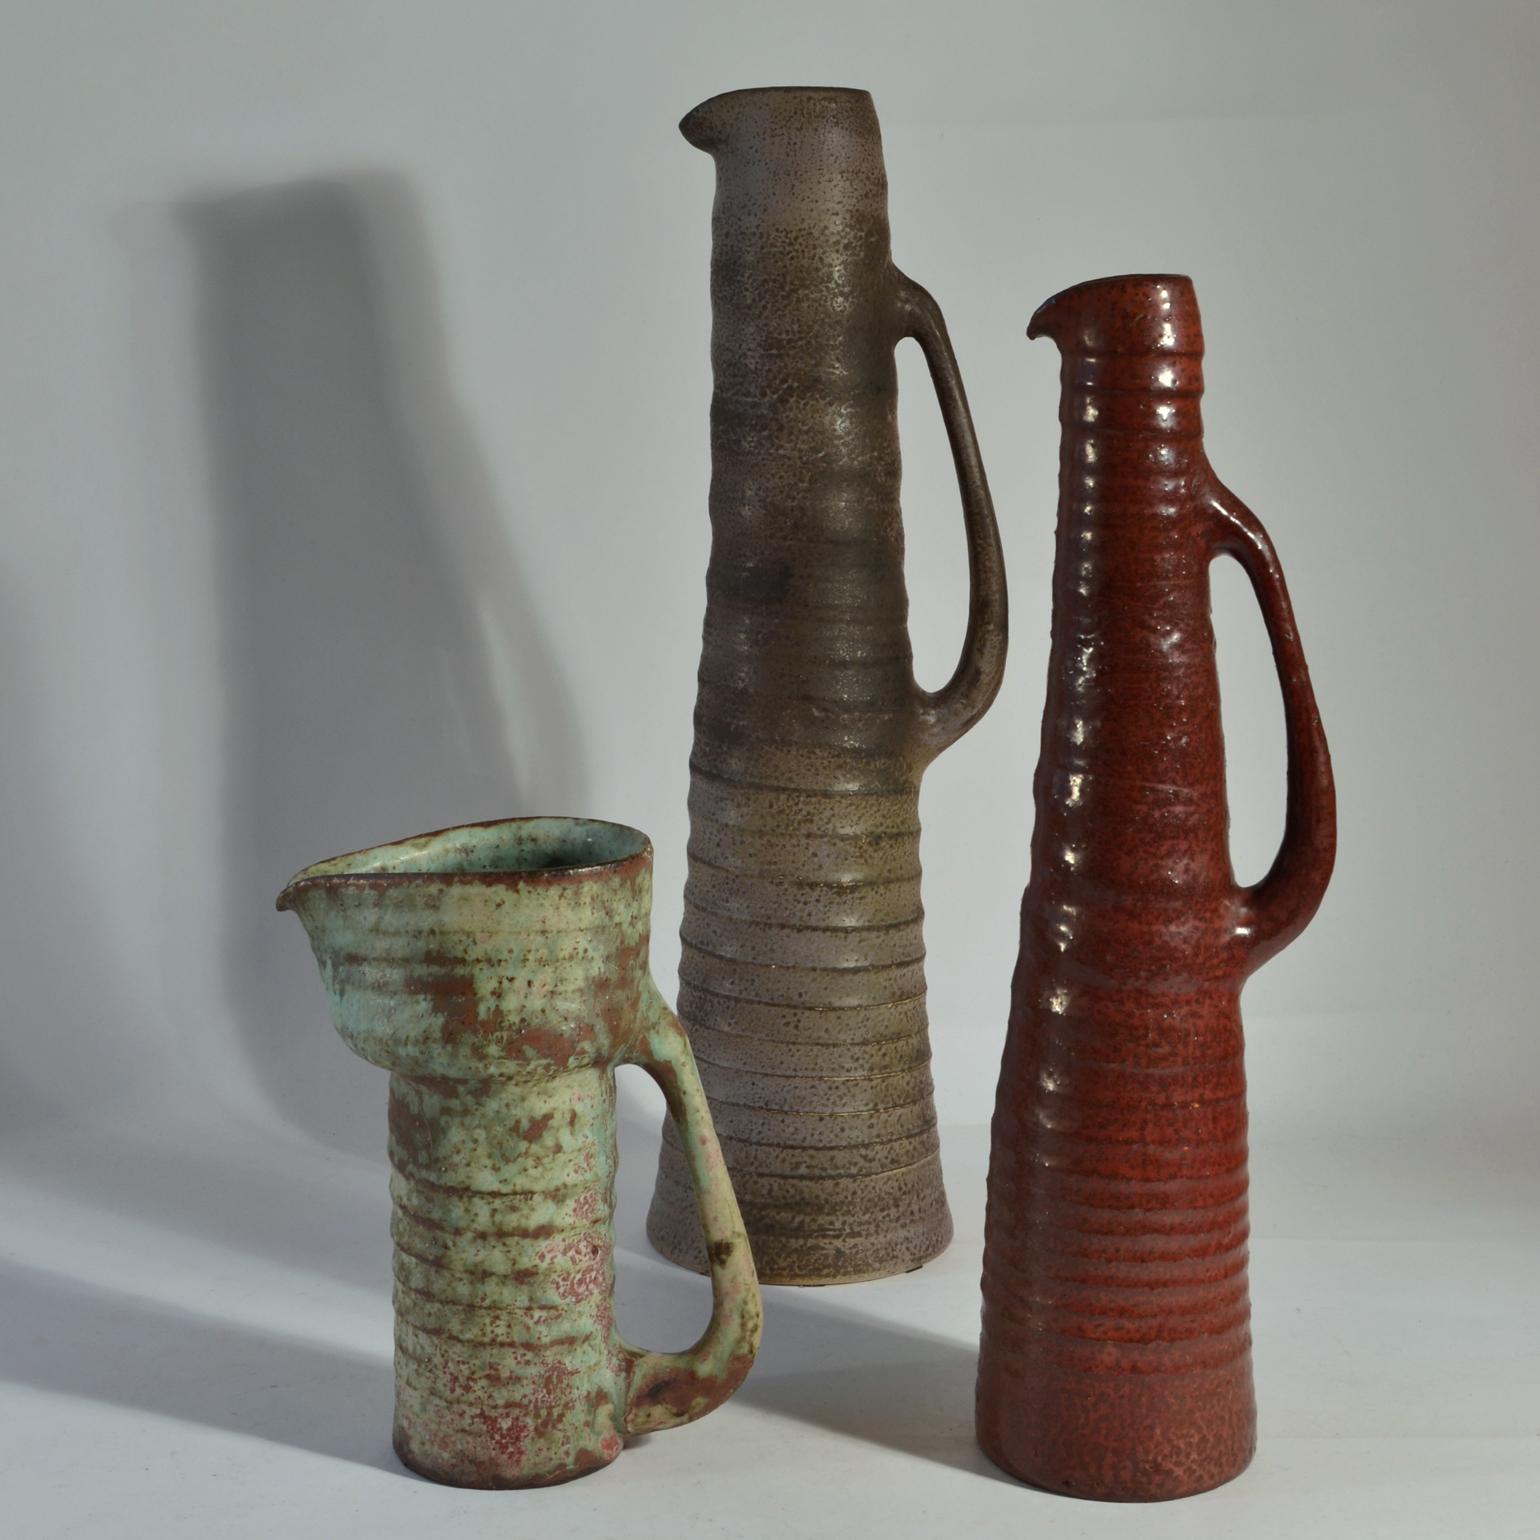 Rare group of six whimsical jugs / vases with long downward ears in various heights with earth tone glazes in muted colours. They are like sculptures with almost human character created on the turning wheel by highly technical skilled Dutch Mobach